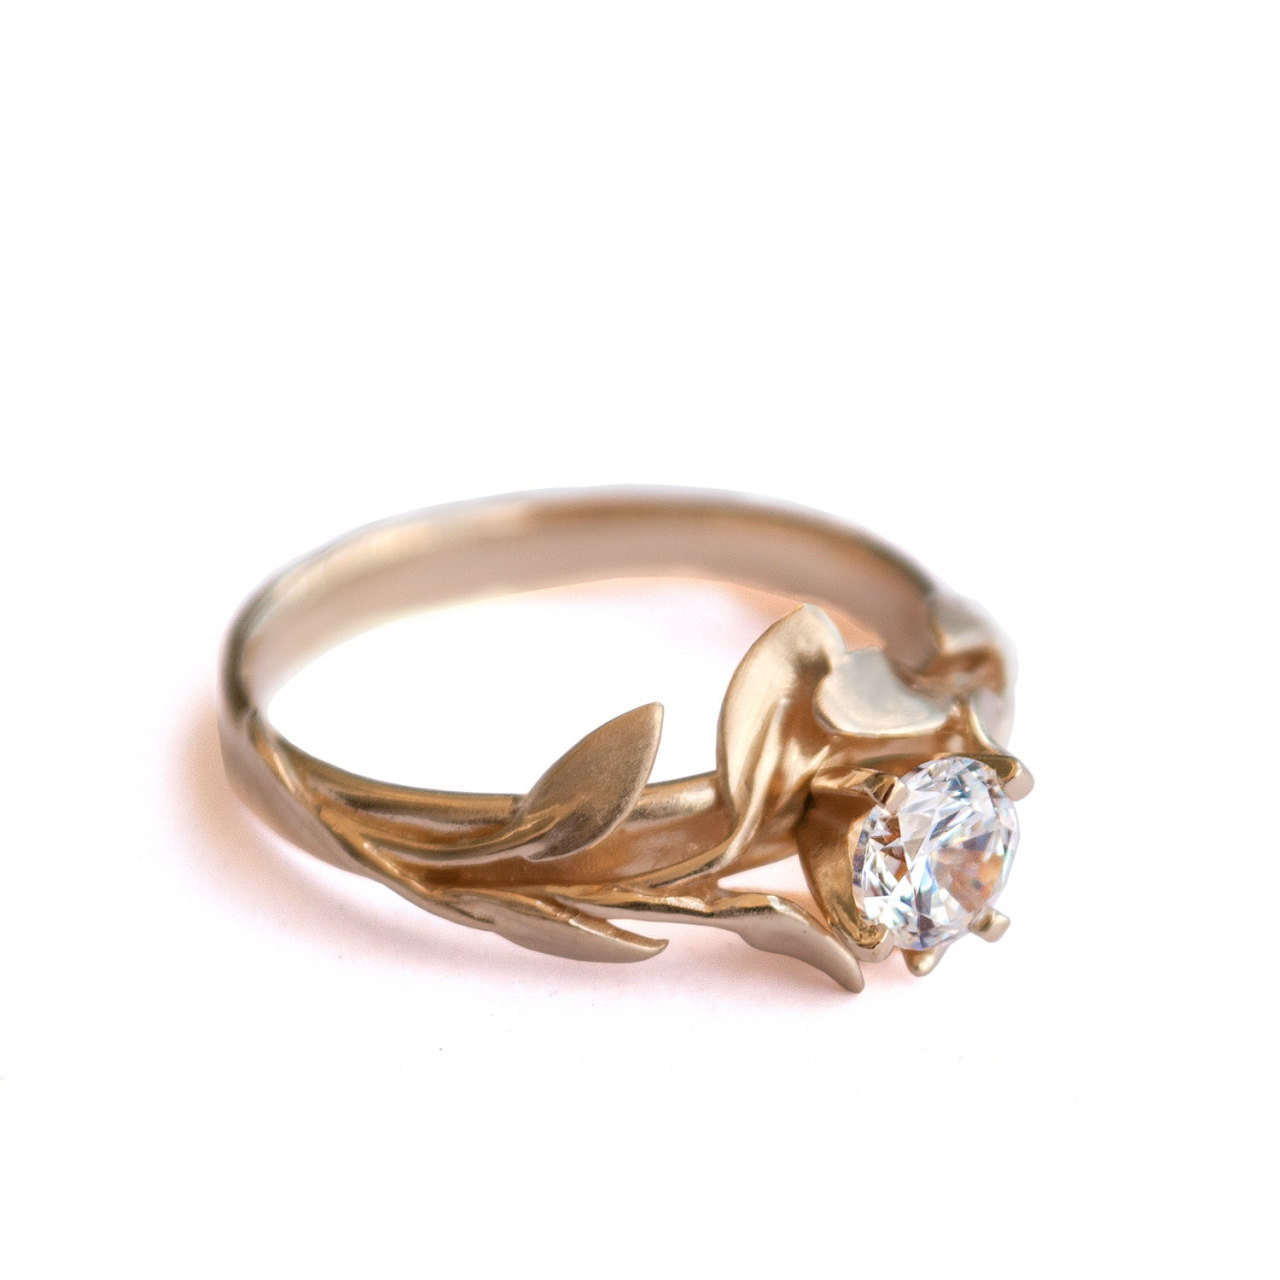 arefinedwoman: Leaves Engagement Ring 18K Yellow Gold by Doron Merav Weddings on Etsy 